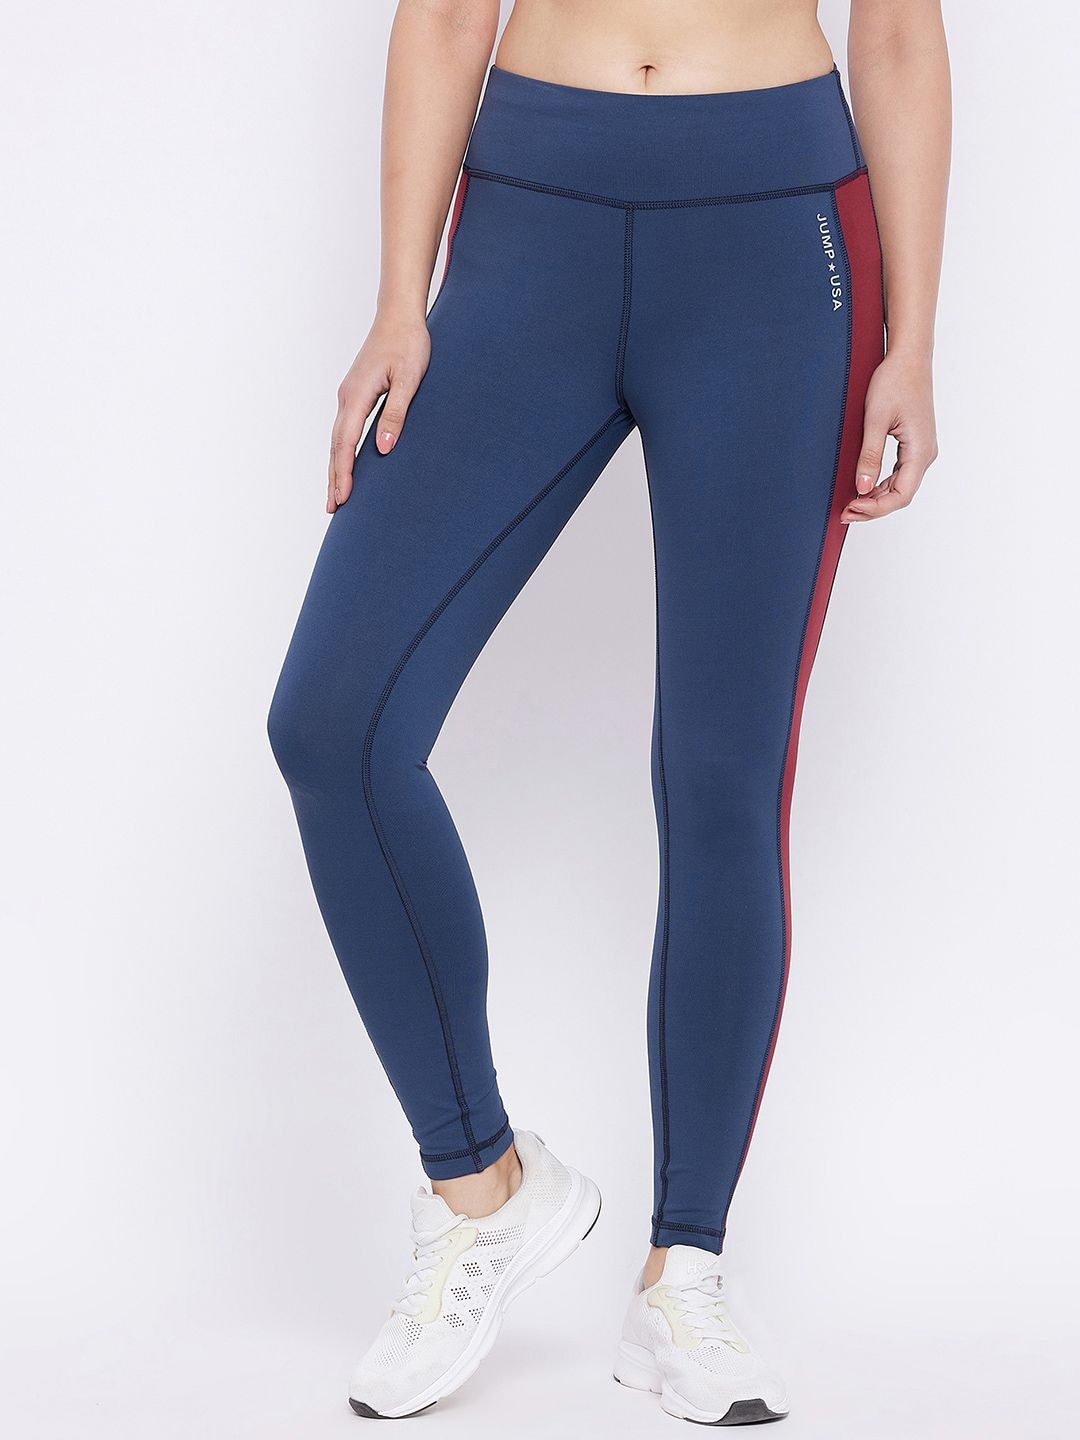 JUMP USA Women Blue & Red Solid Tights Price in India